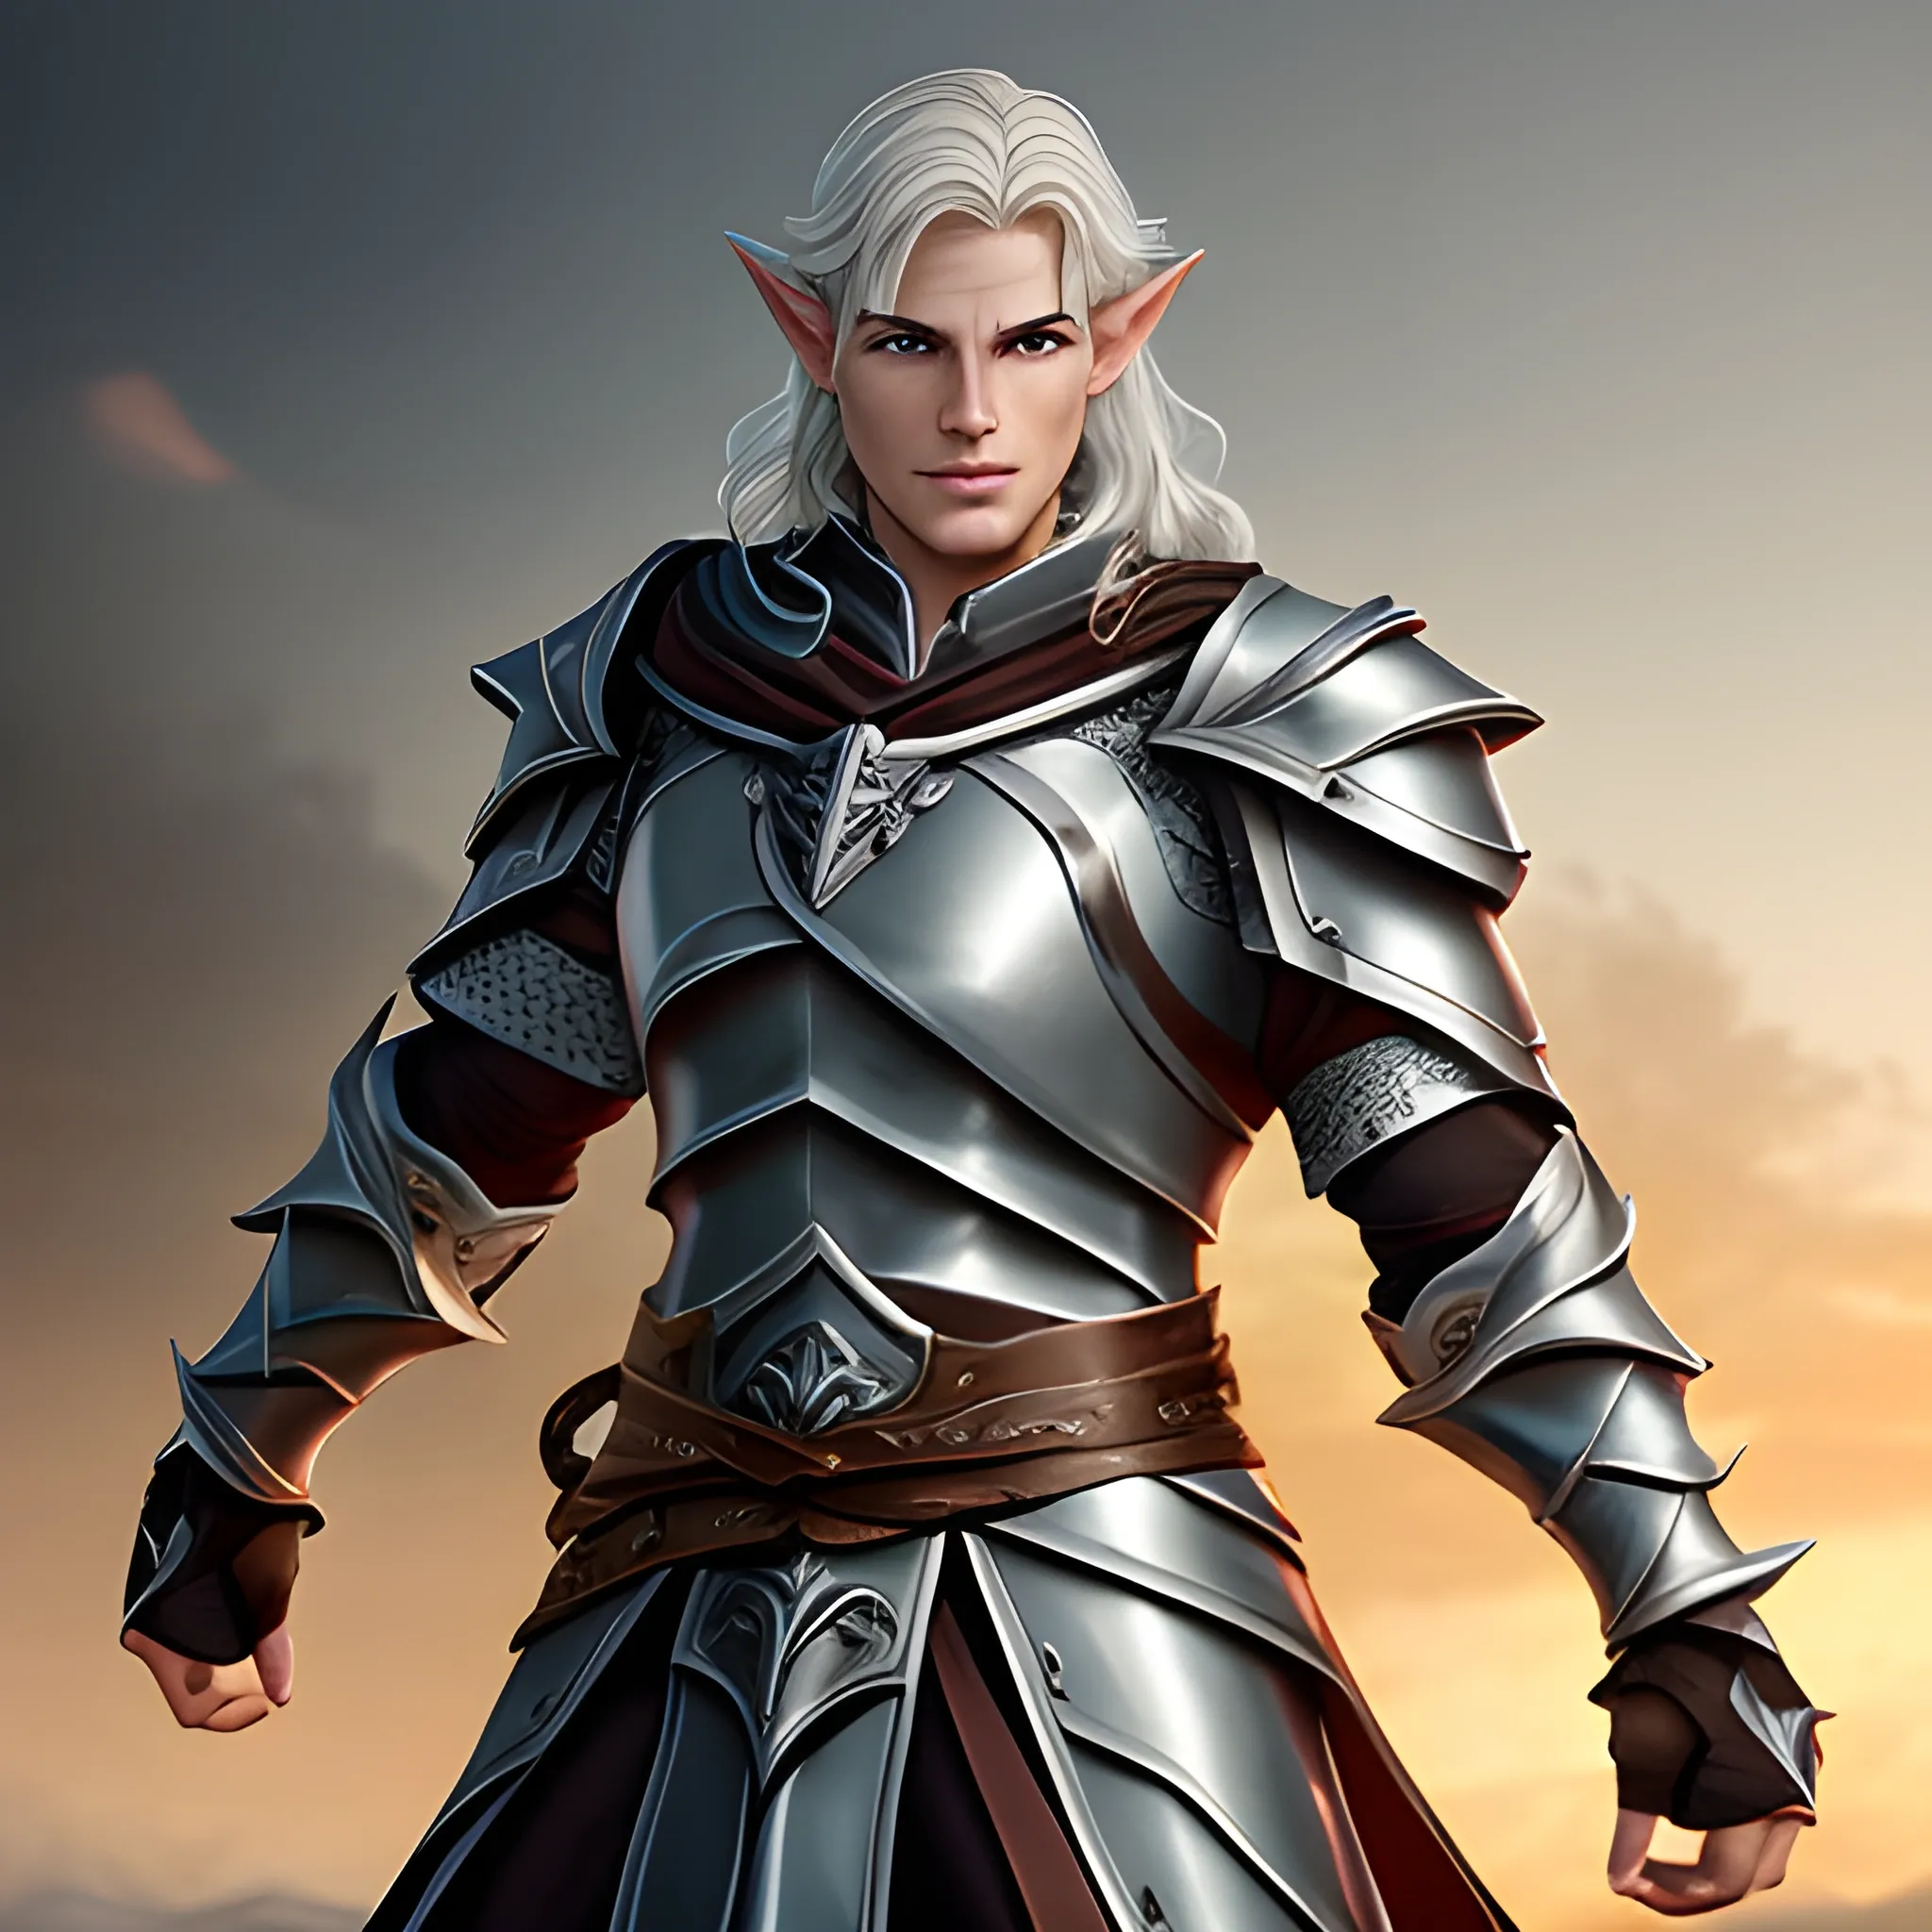 Kaelen Stormrider, a male half-elf paladin, possesses a commanding presence and a striking combination of elven grace and human strength. Here is a description of his appearance and demeanor:

Standing at an impressive height, Kaelen carries himself with an air of confidence and nobility. His physique combines the refined features of his elven heritage with the robustness inherited from his human lineage. Though lean and athletic, his frame reveals underlying strength, a testament to his dedication to his martial training.

Kaelen's fair complexion bears a touch of warmth, reflecting both his elven and human ancestry. His face is characterized by sharp yet gentle features, accentuated by a chiseled jawline and high cheekbones. His captivating eyes, a piercing shade of stormy gray or deep blue, reveal a depth of conviction and determination.

His hair, often styled in a swept-back manner, falls in waves or locks that resemble the tempestuous sea. The color can vary, ranging from a dark chestnut brown to a silvery hue reminiscent of moonlight reflecting off water. It flows freely, occasionally catching the light and accentuating his every movement.

Kaelen's attire reflects his devotion to his paladin oath and his quest for righteousness. He wears polished, gleaming plate armor adorned with intricate engravings and symbols representing his deity or personal convictions. Over his armor, he may don a flowing, azure-colored cloak, emblazoned with the emblem of his order or the symbol of the storm.

His demeanor is one of unwavering resolve and compassionate determination. Kaelen's eyes hold a spark of idealism, tempered by the wisdom gained from his experiences. He exudes a natural charisma, with a voice that resonates with conviction and inspires those around him.

The mark of his paladinhood may be visible on his person, such as a holy symbol or a sigil representing his chosen deity. It serves as a reminder of his sacred duty and the divine powers that guide him in his quest to protect the innocent and vanquish evil.

Kaelen Stormrider's appearance, combining the grace of his elven heritage with the strength of his human lineage, mirrors his inner dedication to righteousness and his unwavering commitment to his sworn oath as a paladin.